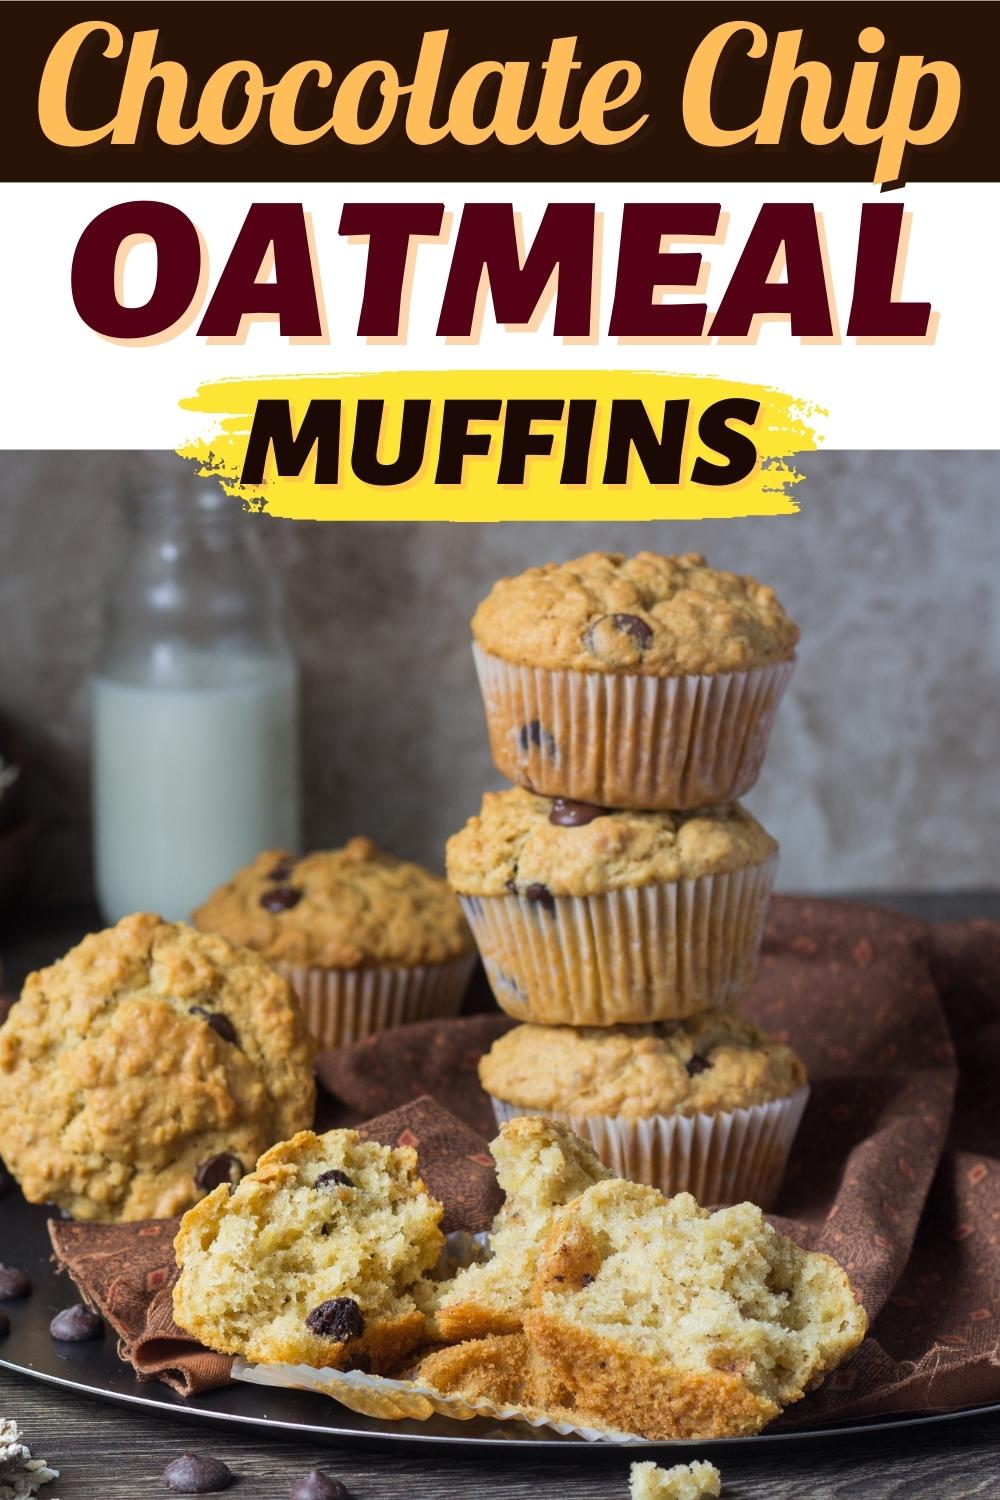 Chocolate Chip Oatmeal Muffins (Easy Recipe) - Insanely Good